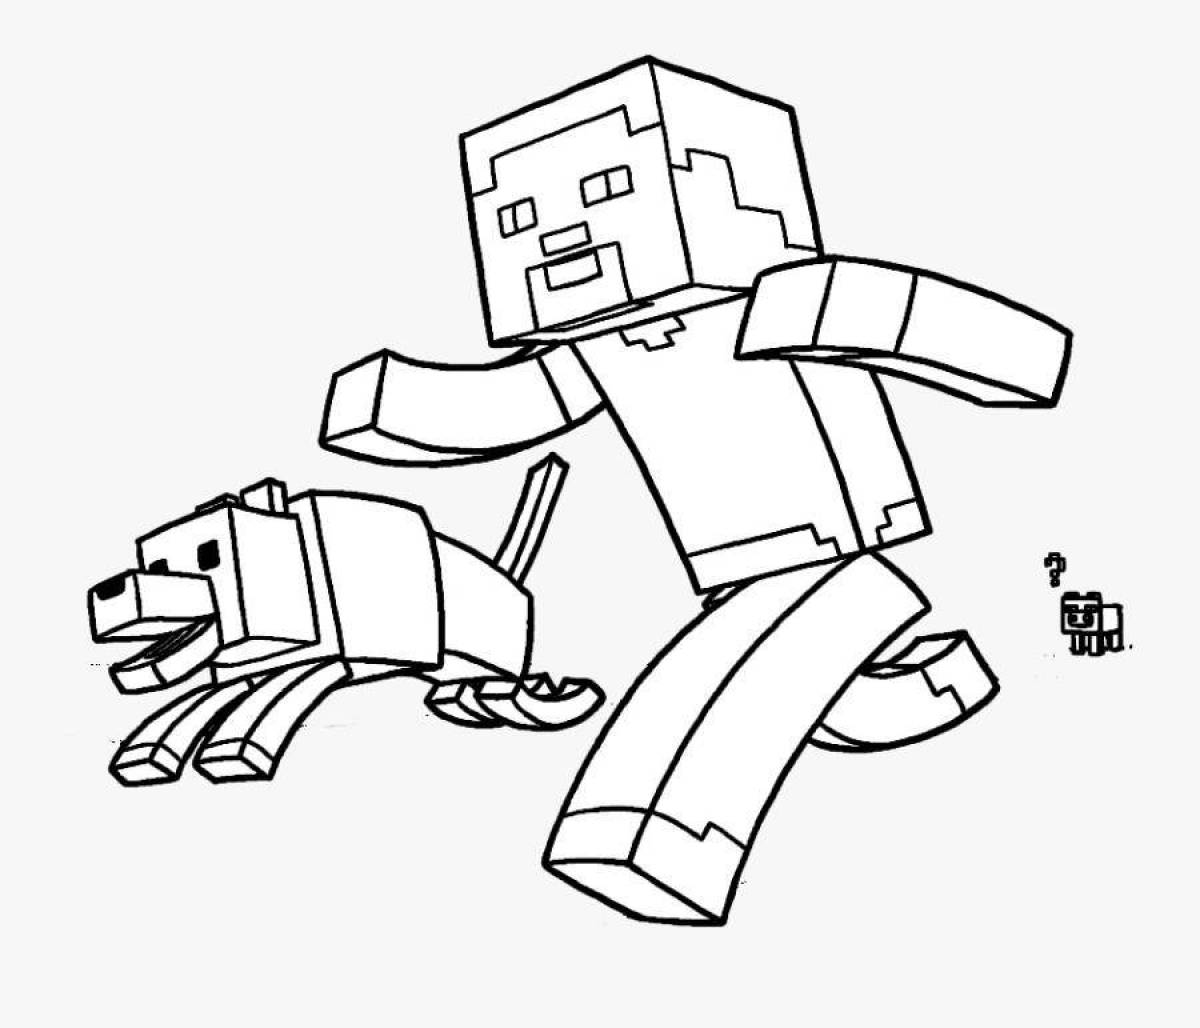 Playful alex and steve minecraft coloring